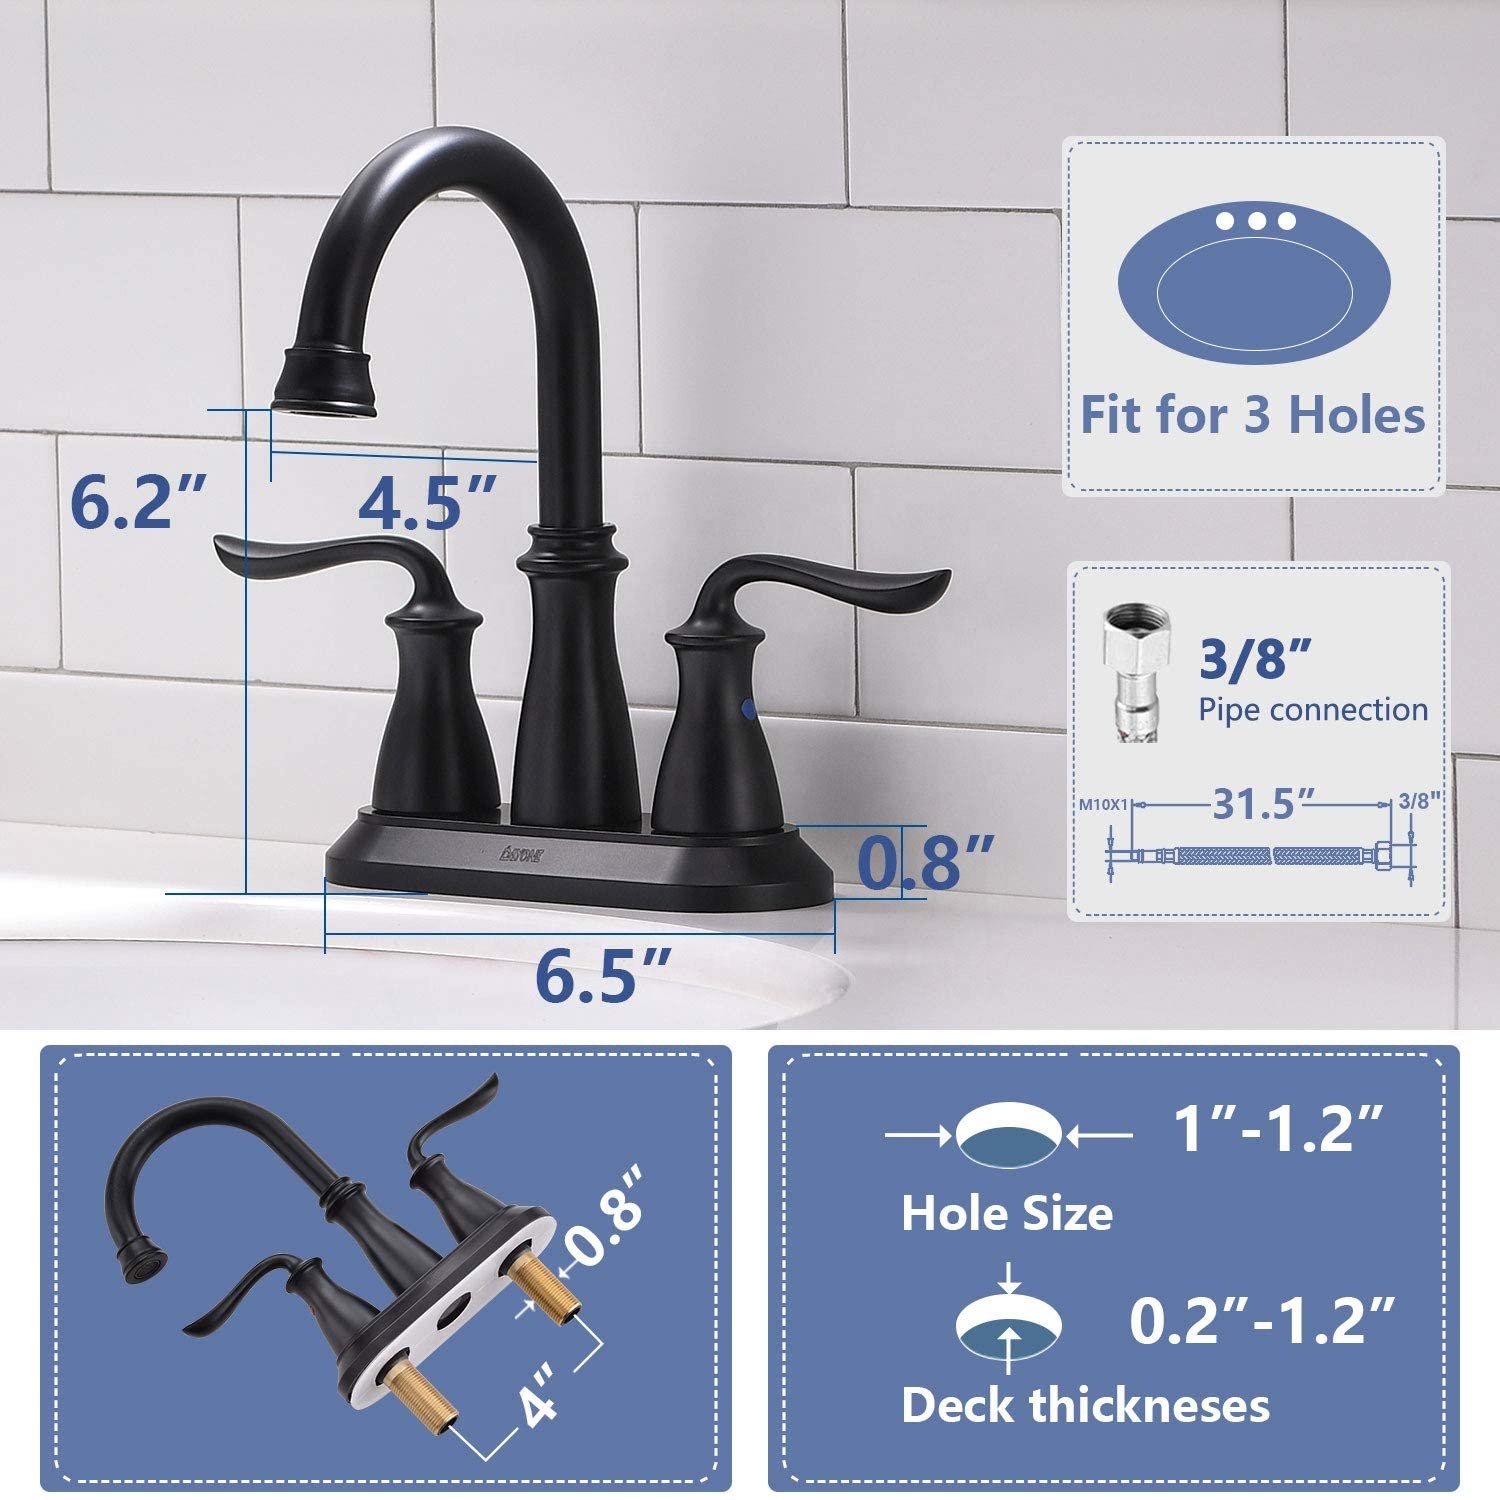 Classic Stainless Steel Bathroom Black And Gold Kitchen CUPC Bathroom Basin Faucet